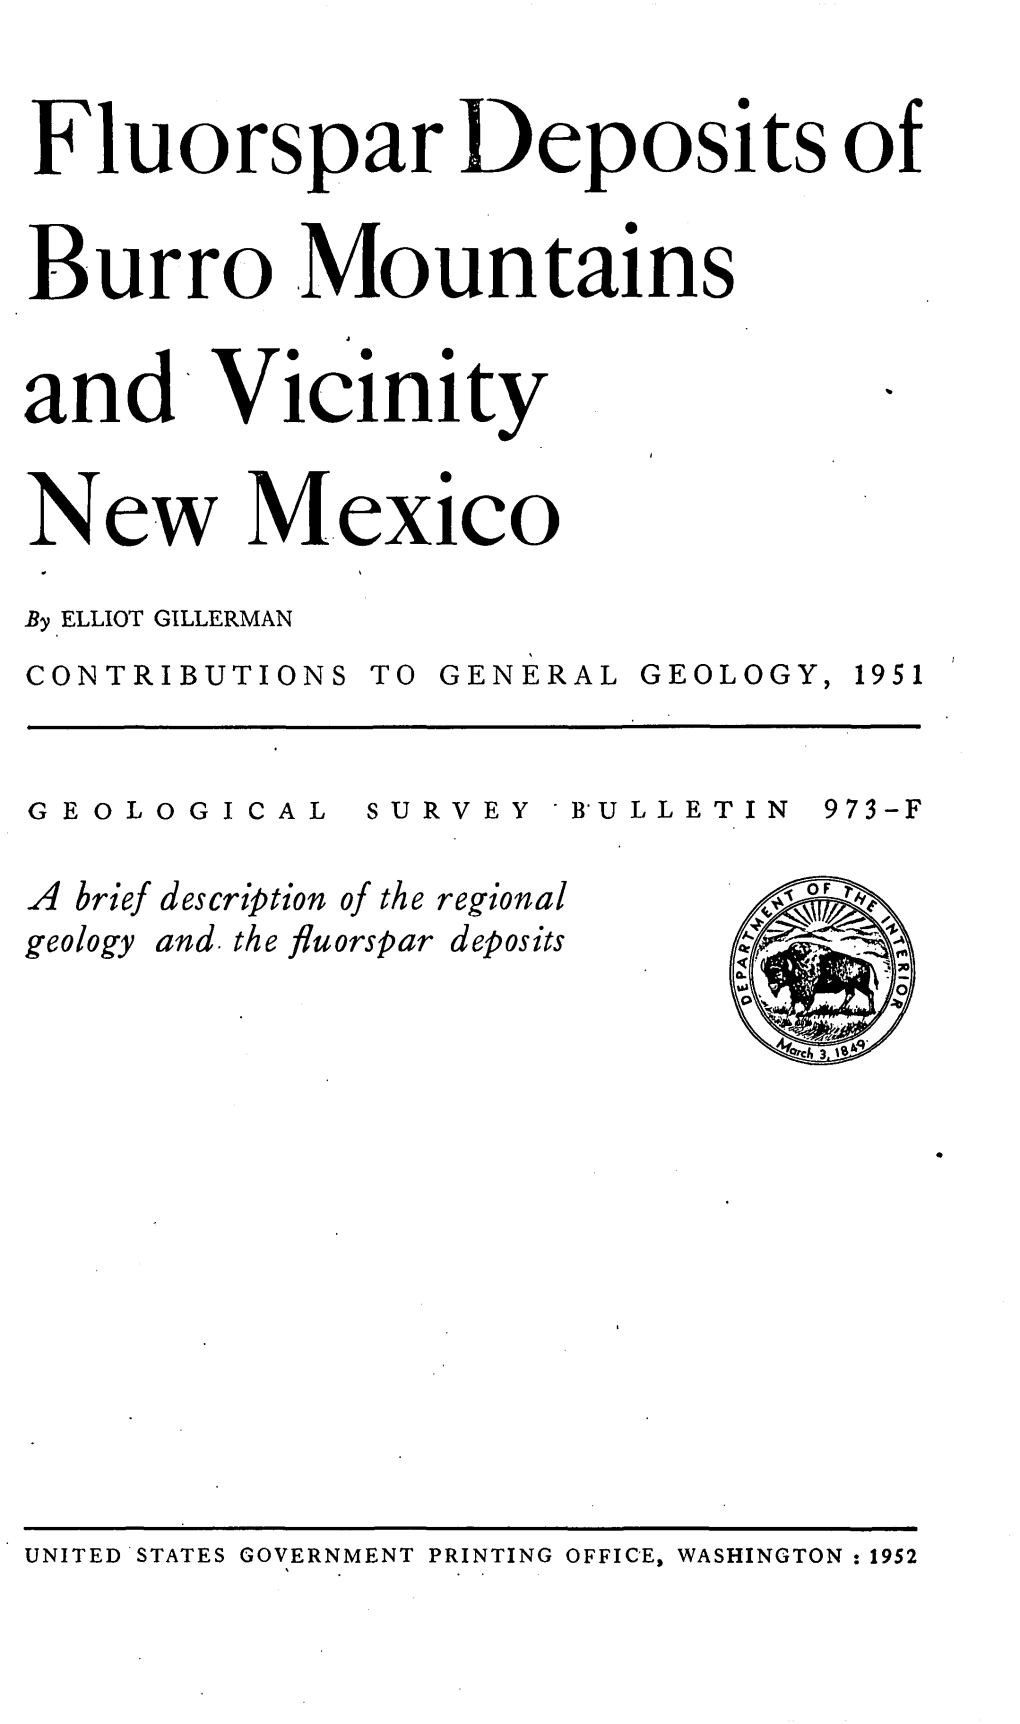 Fluorspar Deposits of Burro Mountains and Vicinity New Mexico